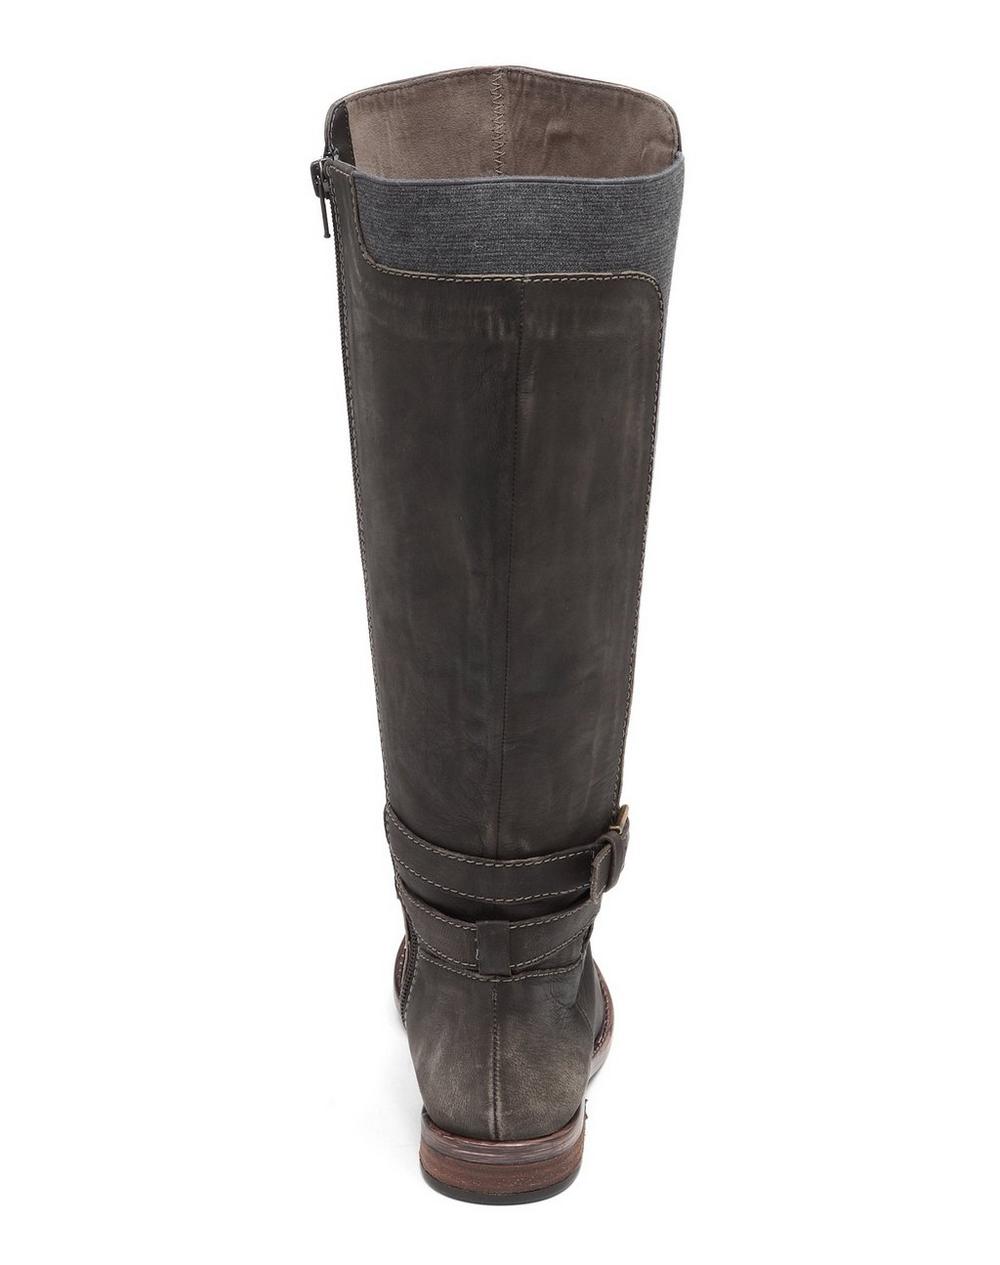 OSTRAND RIDING BOOT, image 3